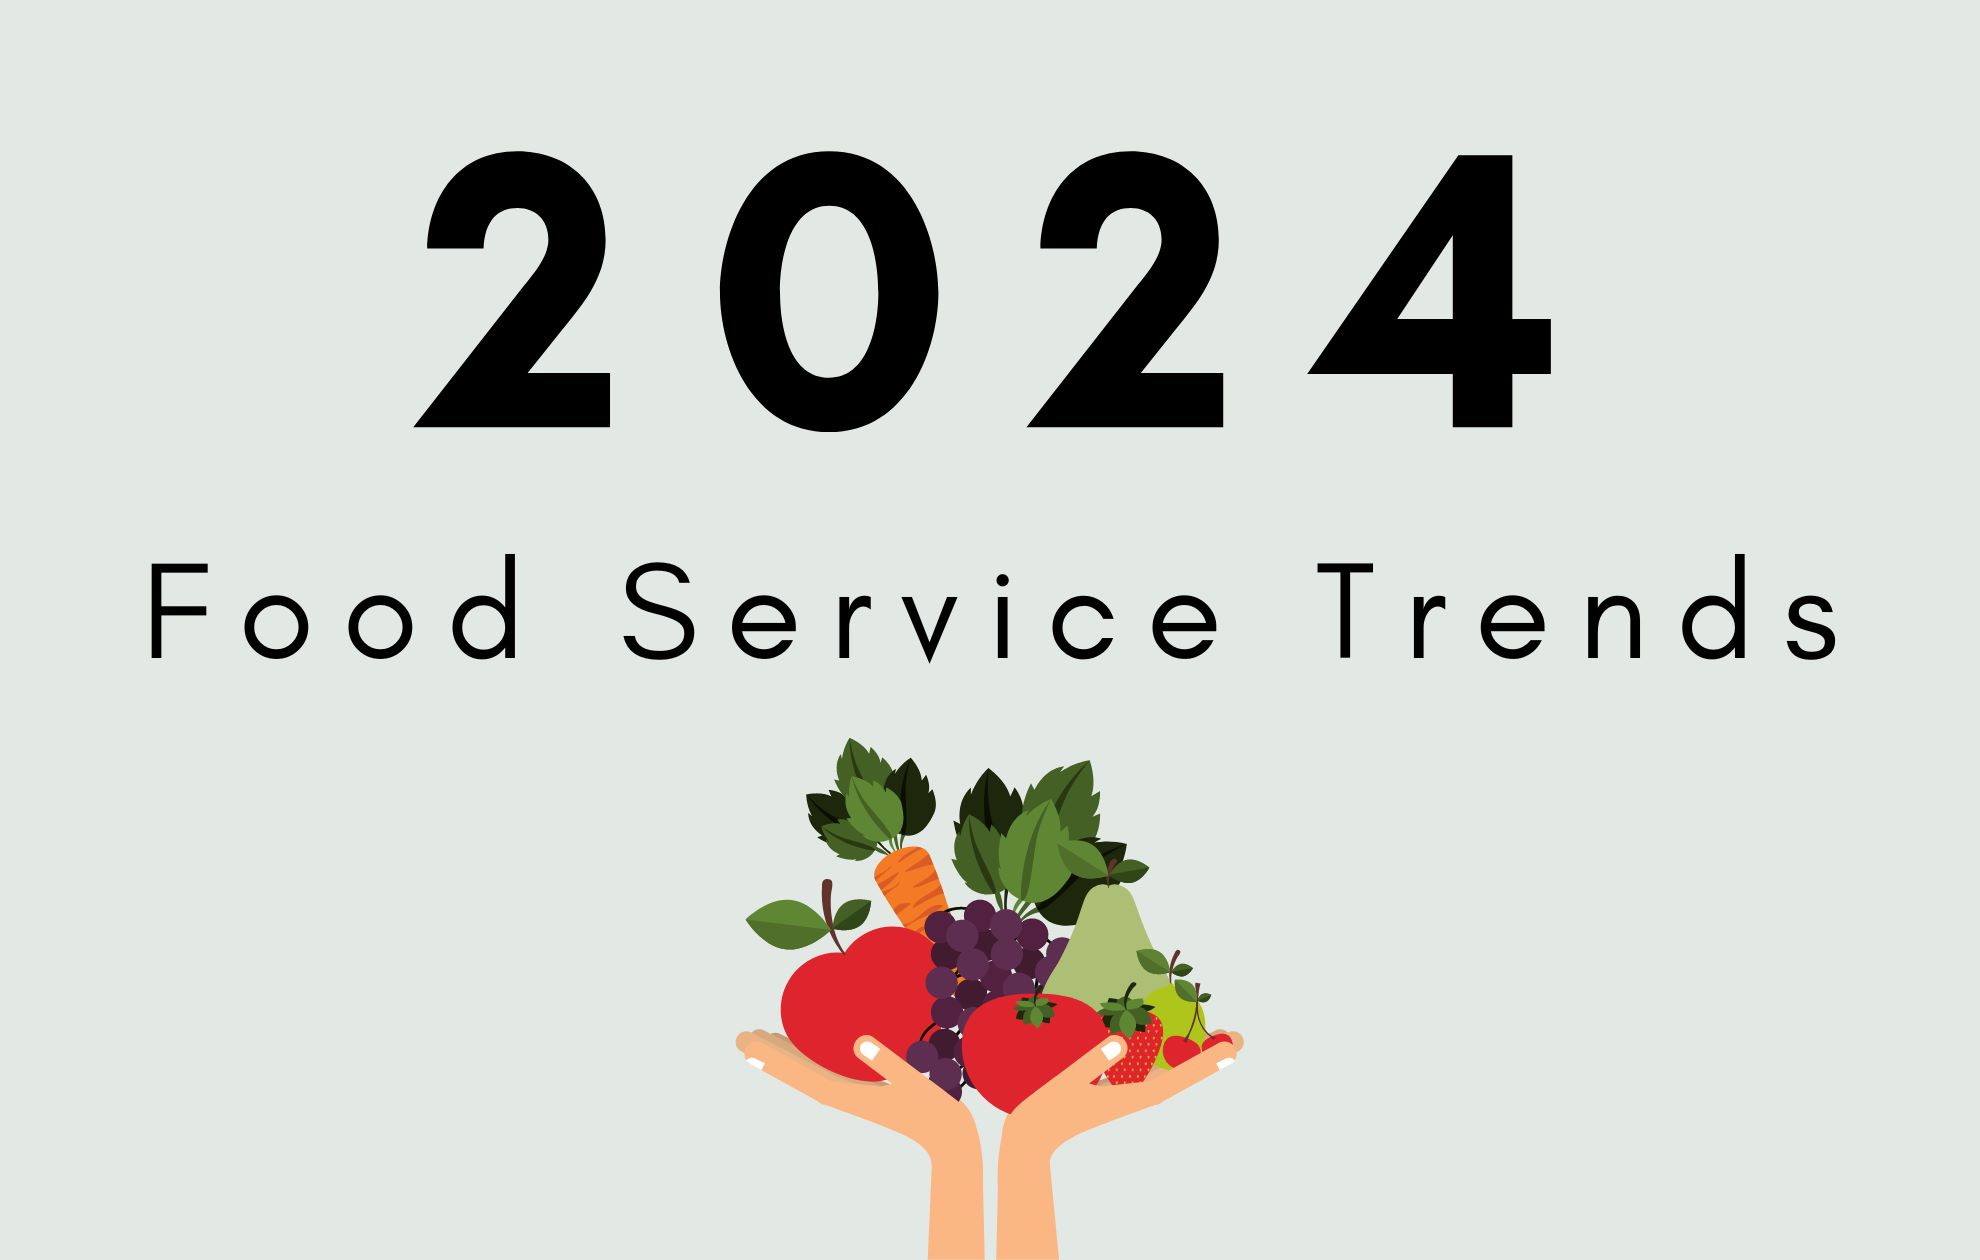 6 Food Service Trends for 2024 (According to the Experts)